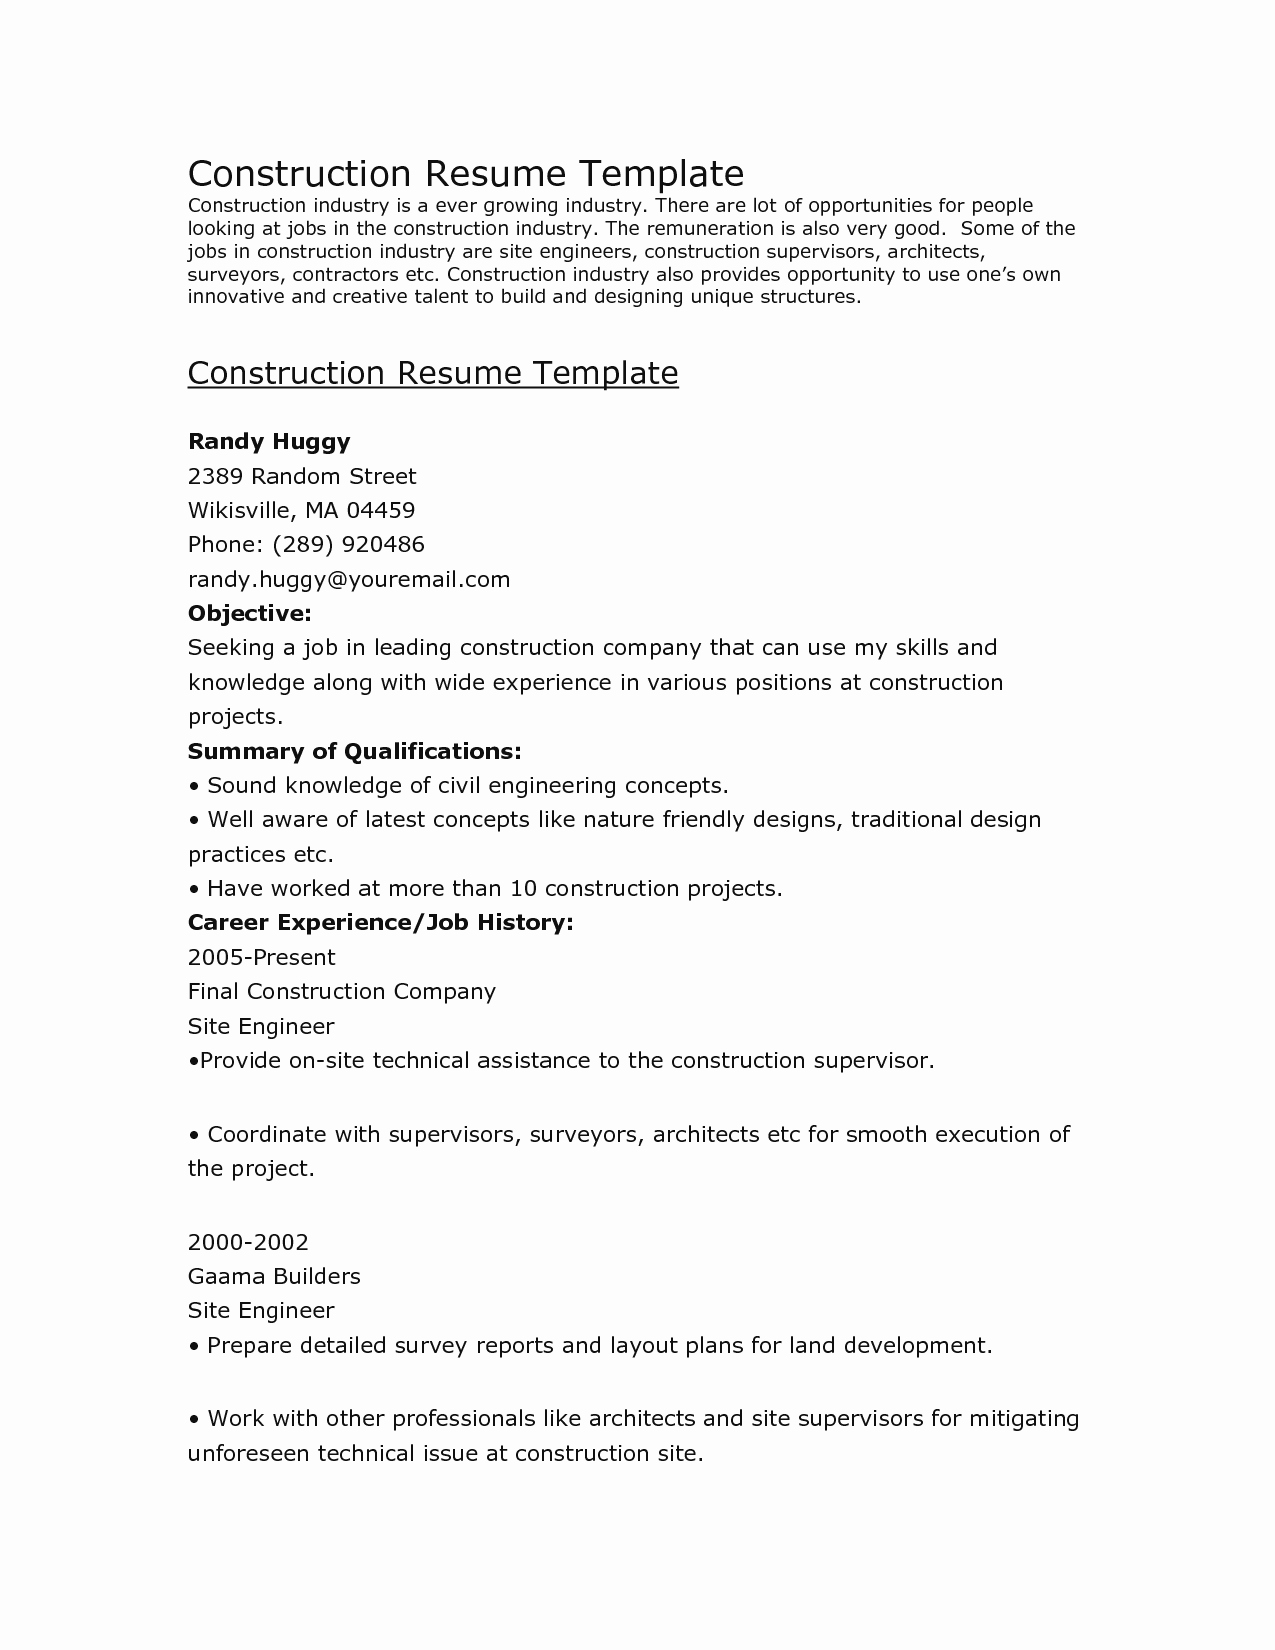 Construction Resume Template Cv Examples